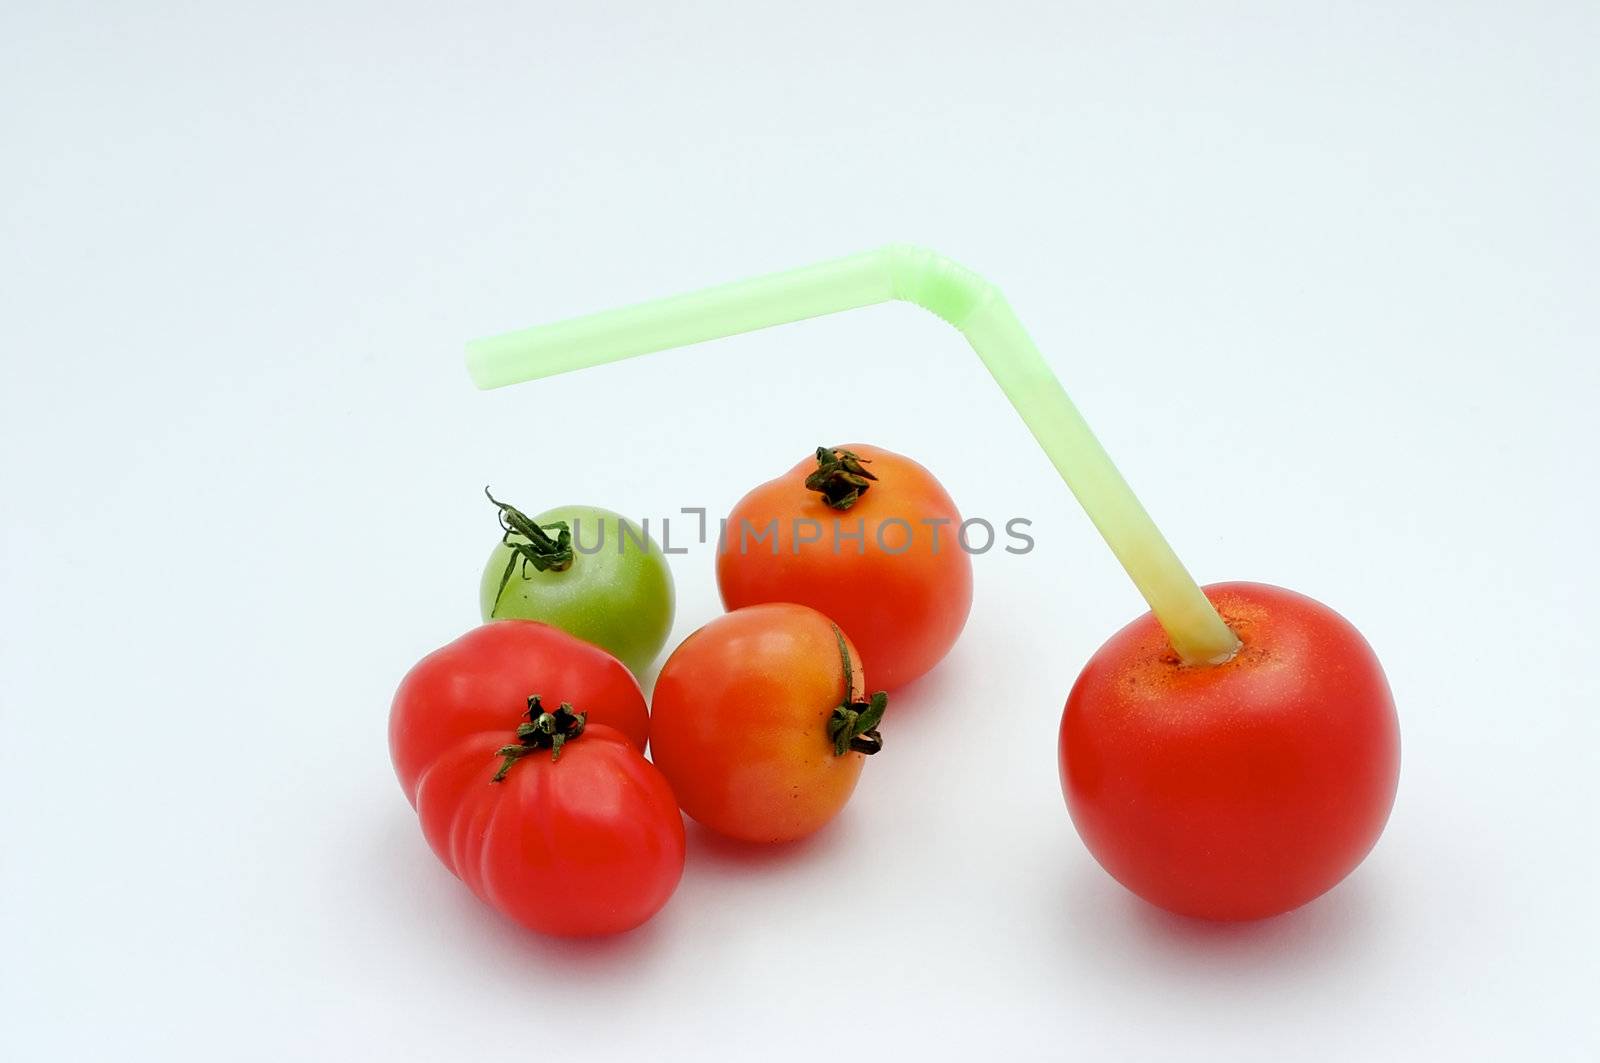 You thought you got a fresh tomato juice before? Can't beat this one. Small tomatoes in a glass filled with water and with a sugar coating with a straw.